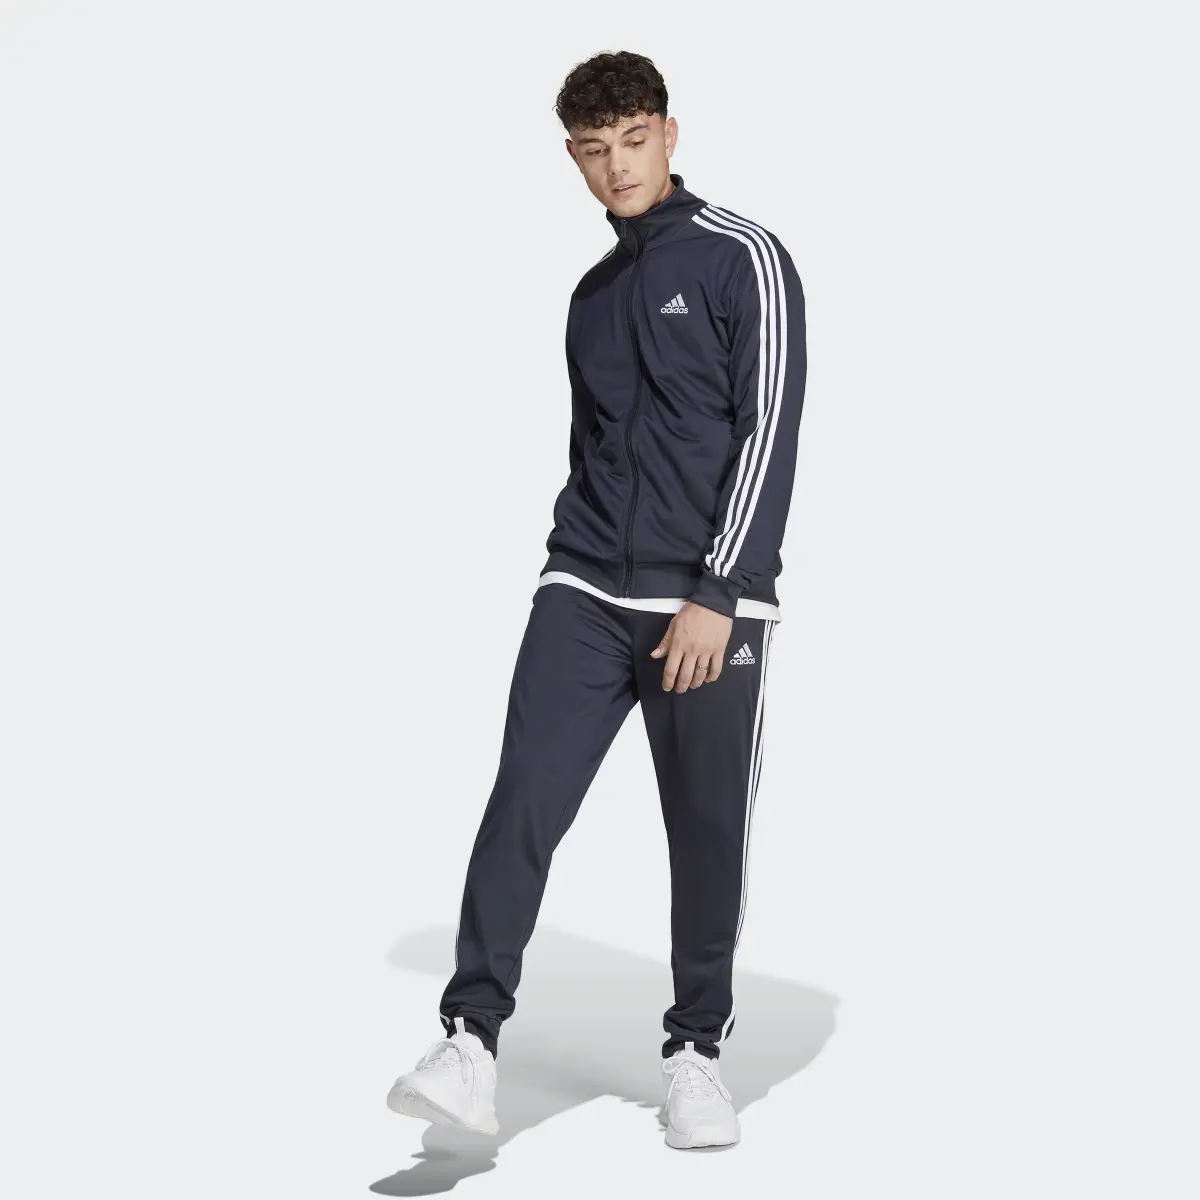 Adidas Basic 3-Stripes Tricot Track Suit. 2